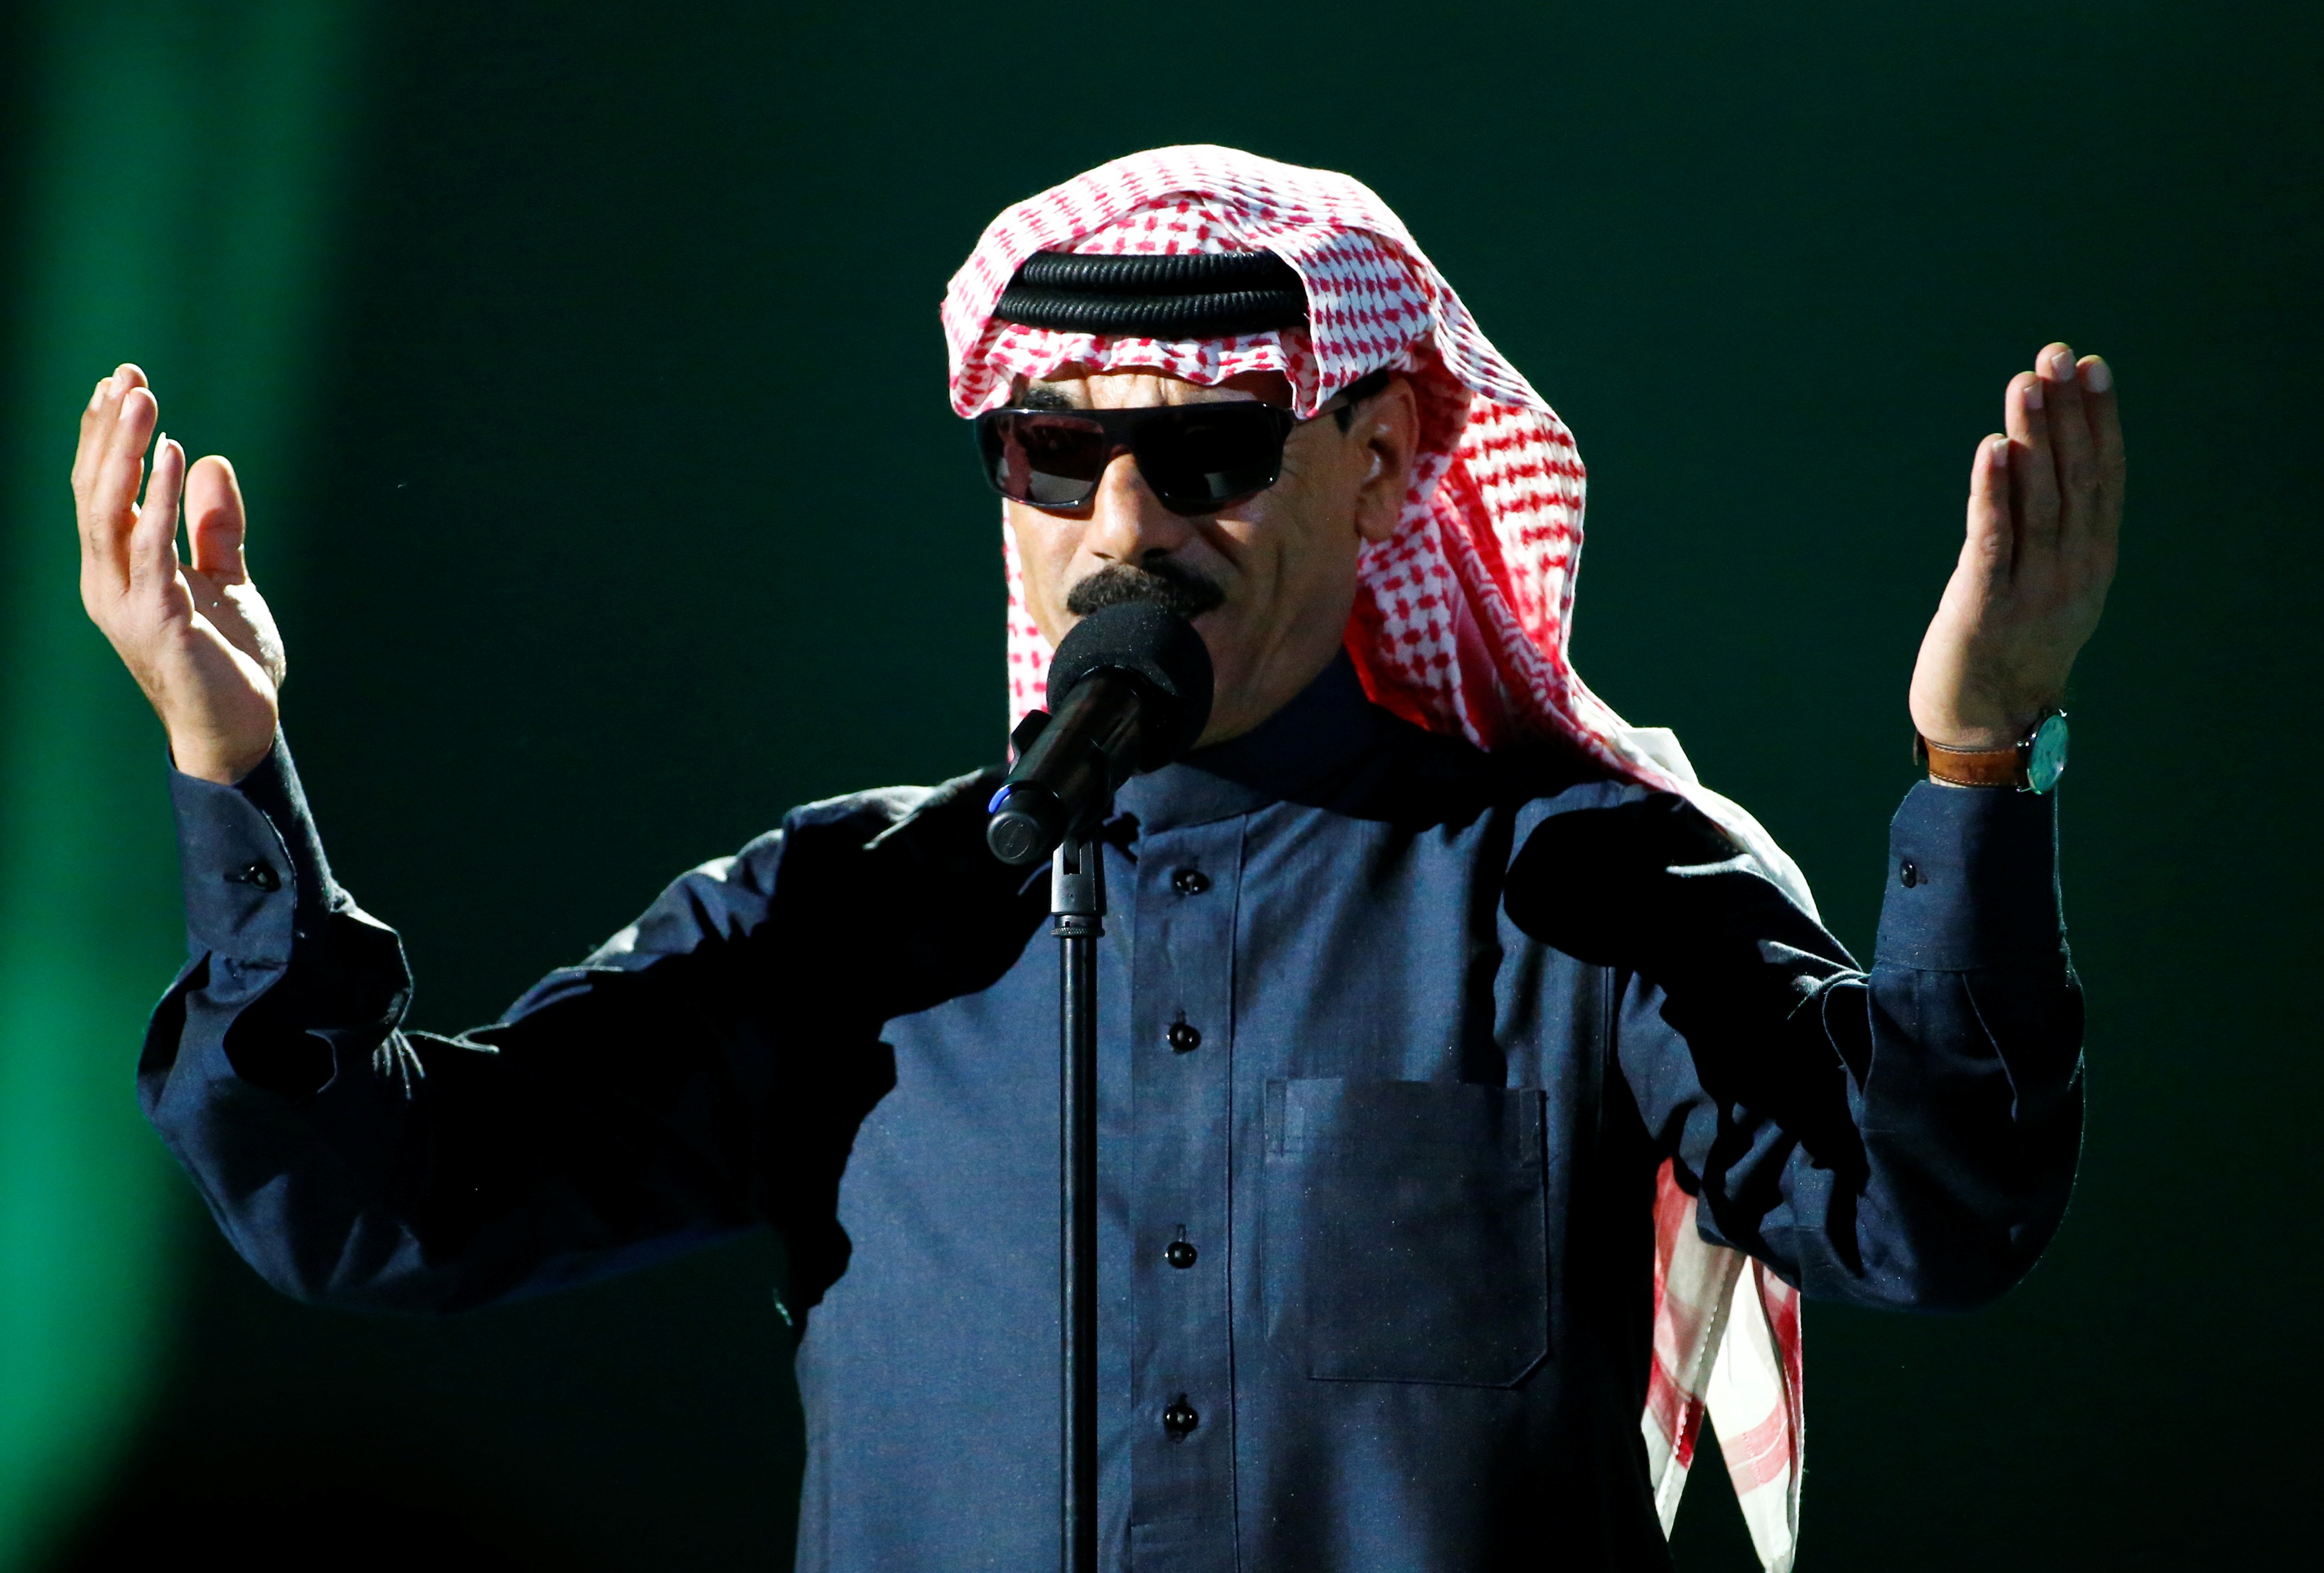 Syrian musician Omar Souleyman performs during the Nobel Peace Prize concert in Oslo